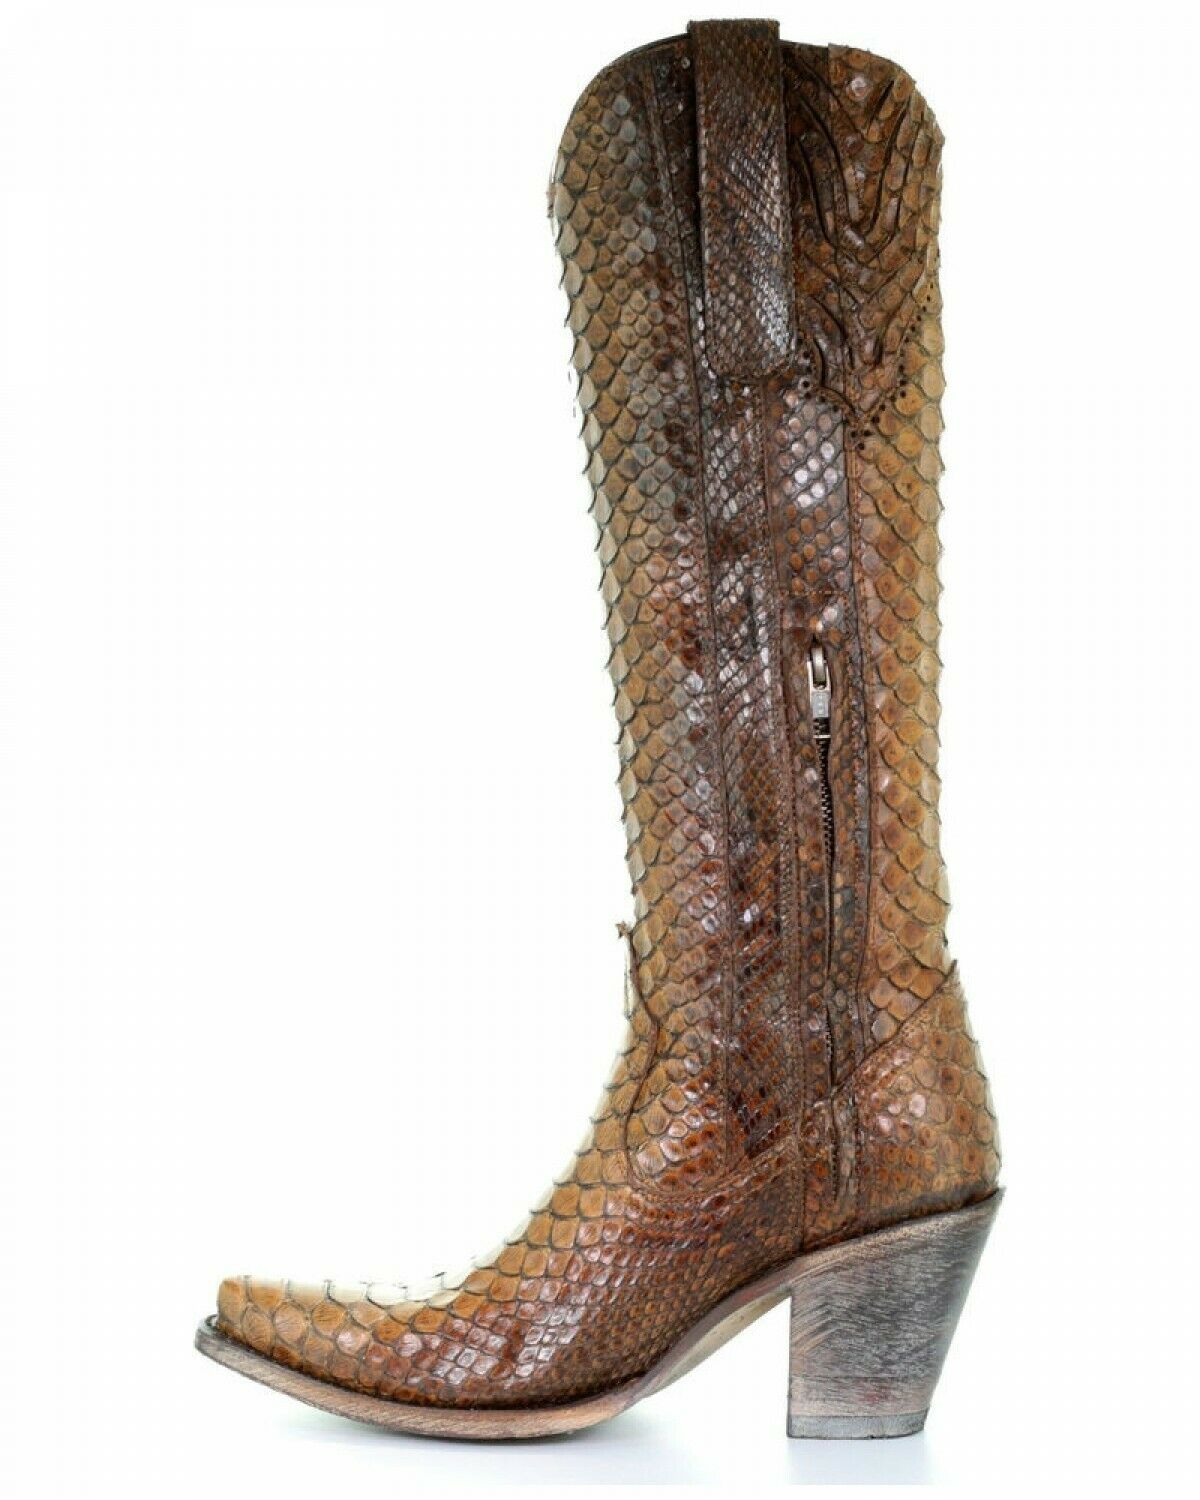 Corral Ladies Tan Full Python Snakeskin Zip-Up Knee-High Boots A3667